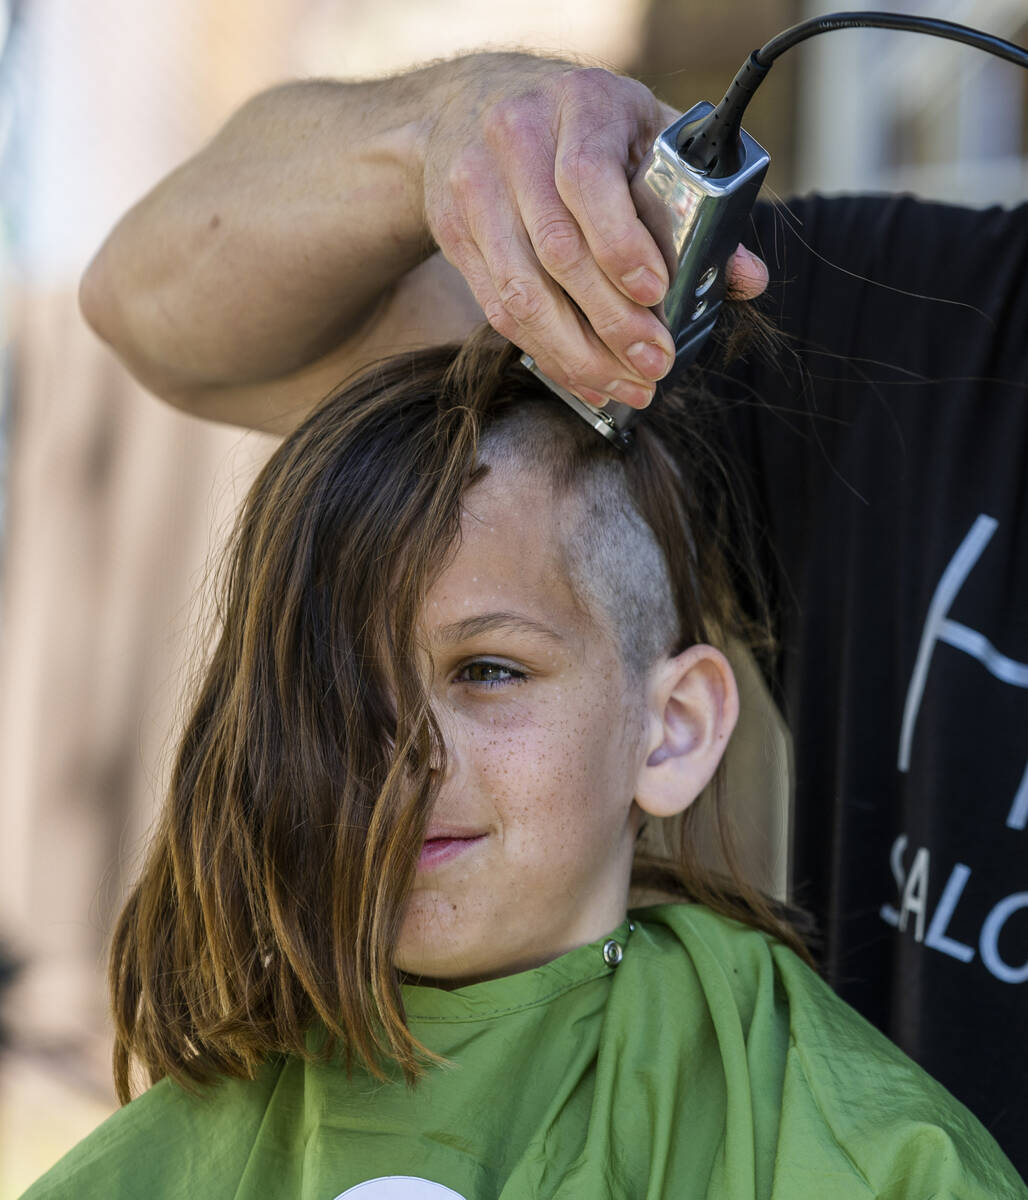 Henry Manjarres, 10, with a group from the Clark County Schools has his long hair shaved by a s ...